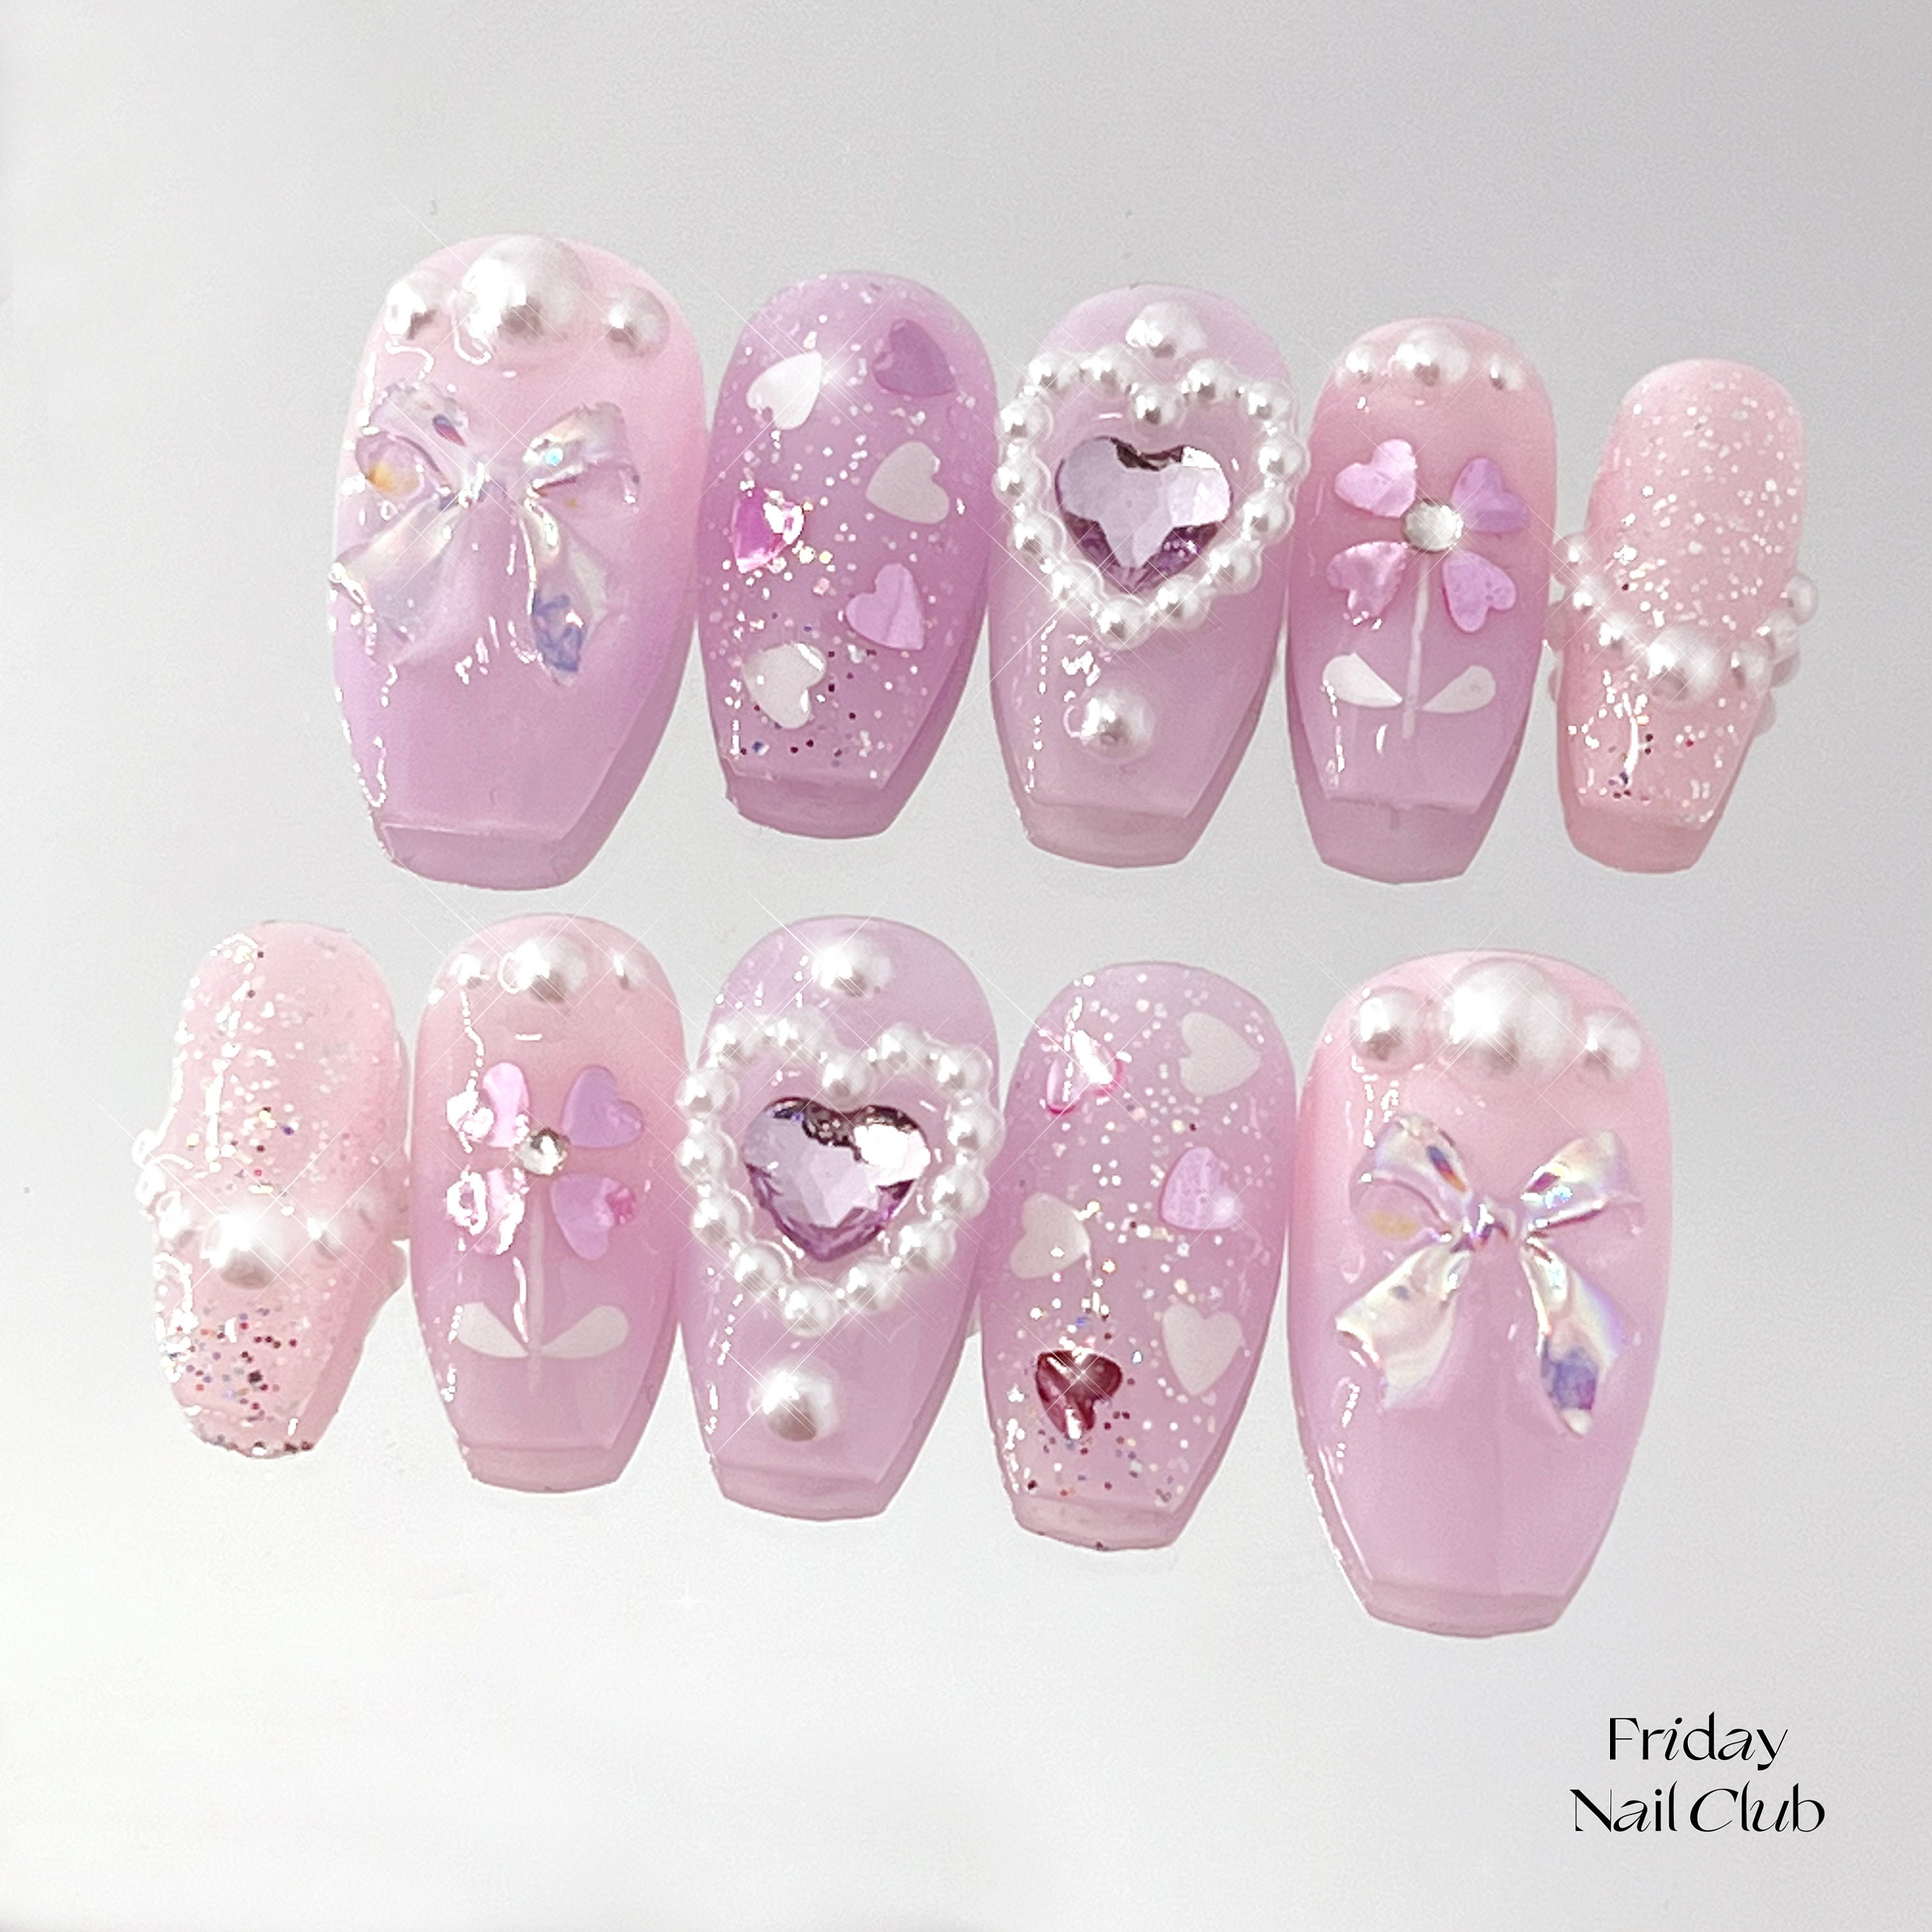  GlimightyX 3D Handmade Press On Nails Medium,Pink Gel Press On  Nails With Charms, Coquette Bow Pearl Coffin Press on Fake Nails Kit,  Reusable Luxury Glue Stick On Nails, Size M 10